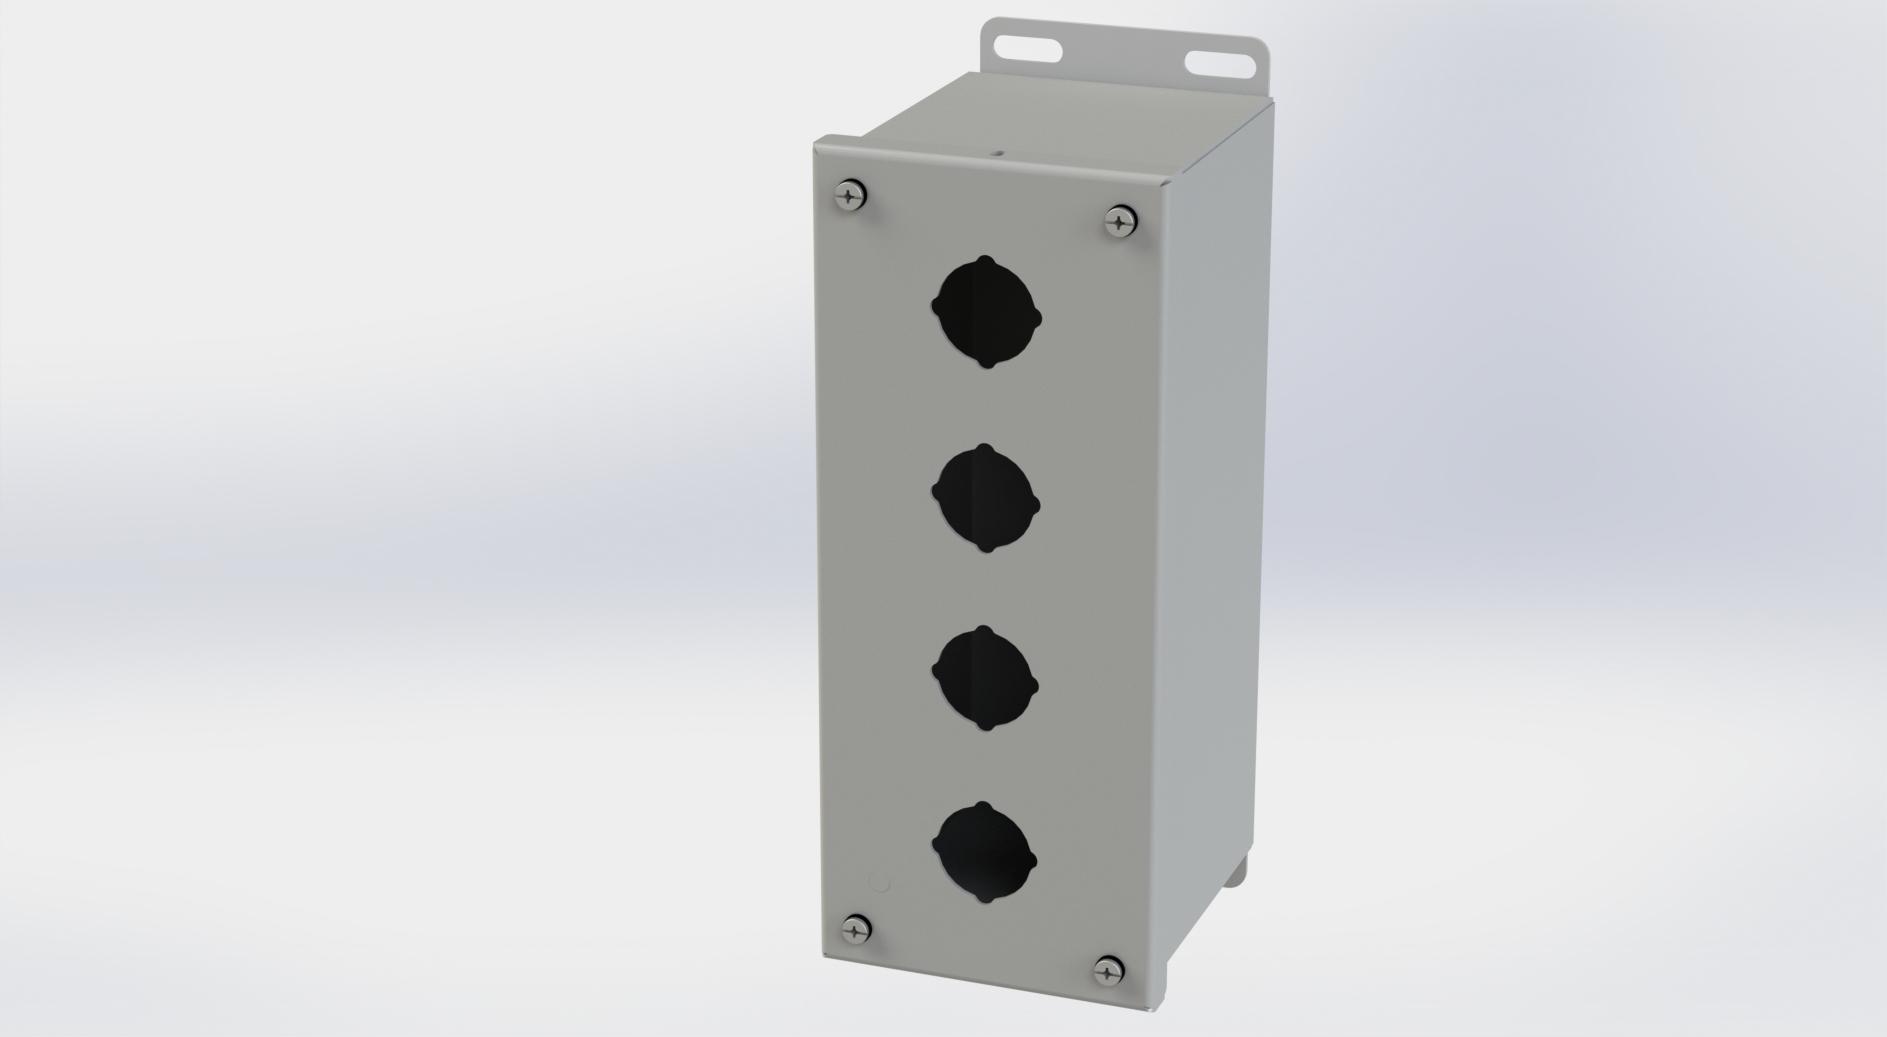 Saginaw Control SCE-4PBX PBX Enclosure, Height:10.00", Width:4.00", Depth:4.75", ANSI-61 gray powder coating inside and out.